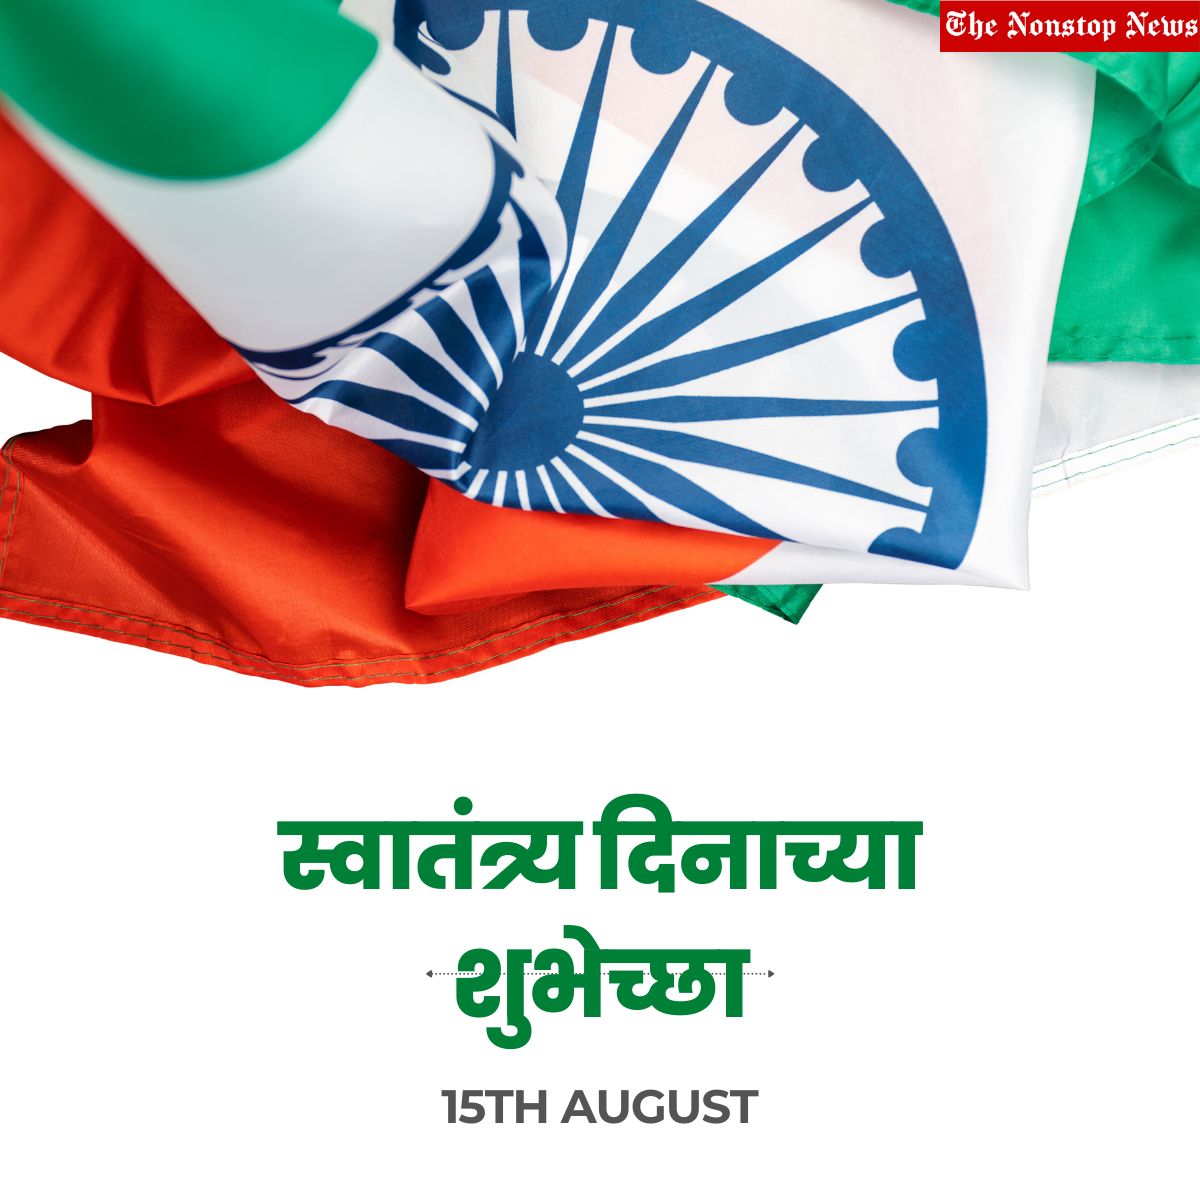 Happy Independence Day 2022 Wishes in Marathi: Quotes, Greetings, Images, Messages, Shayari, Greetings, and Slogans